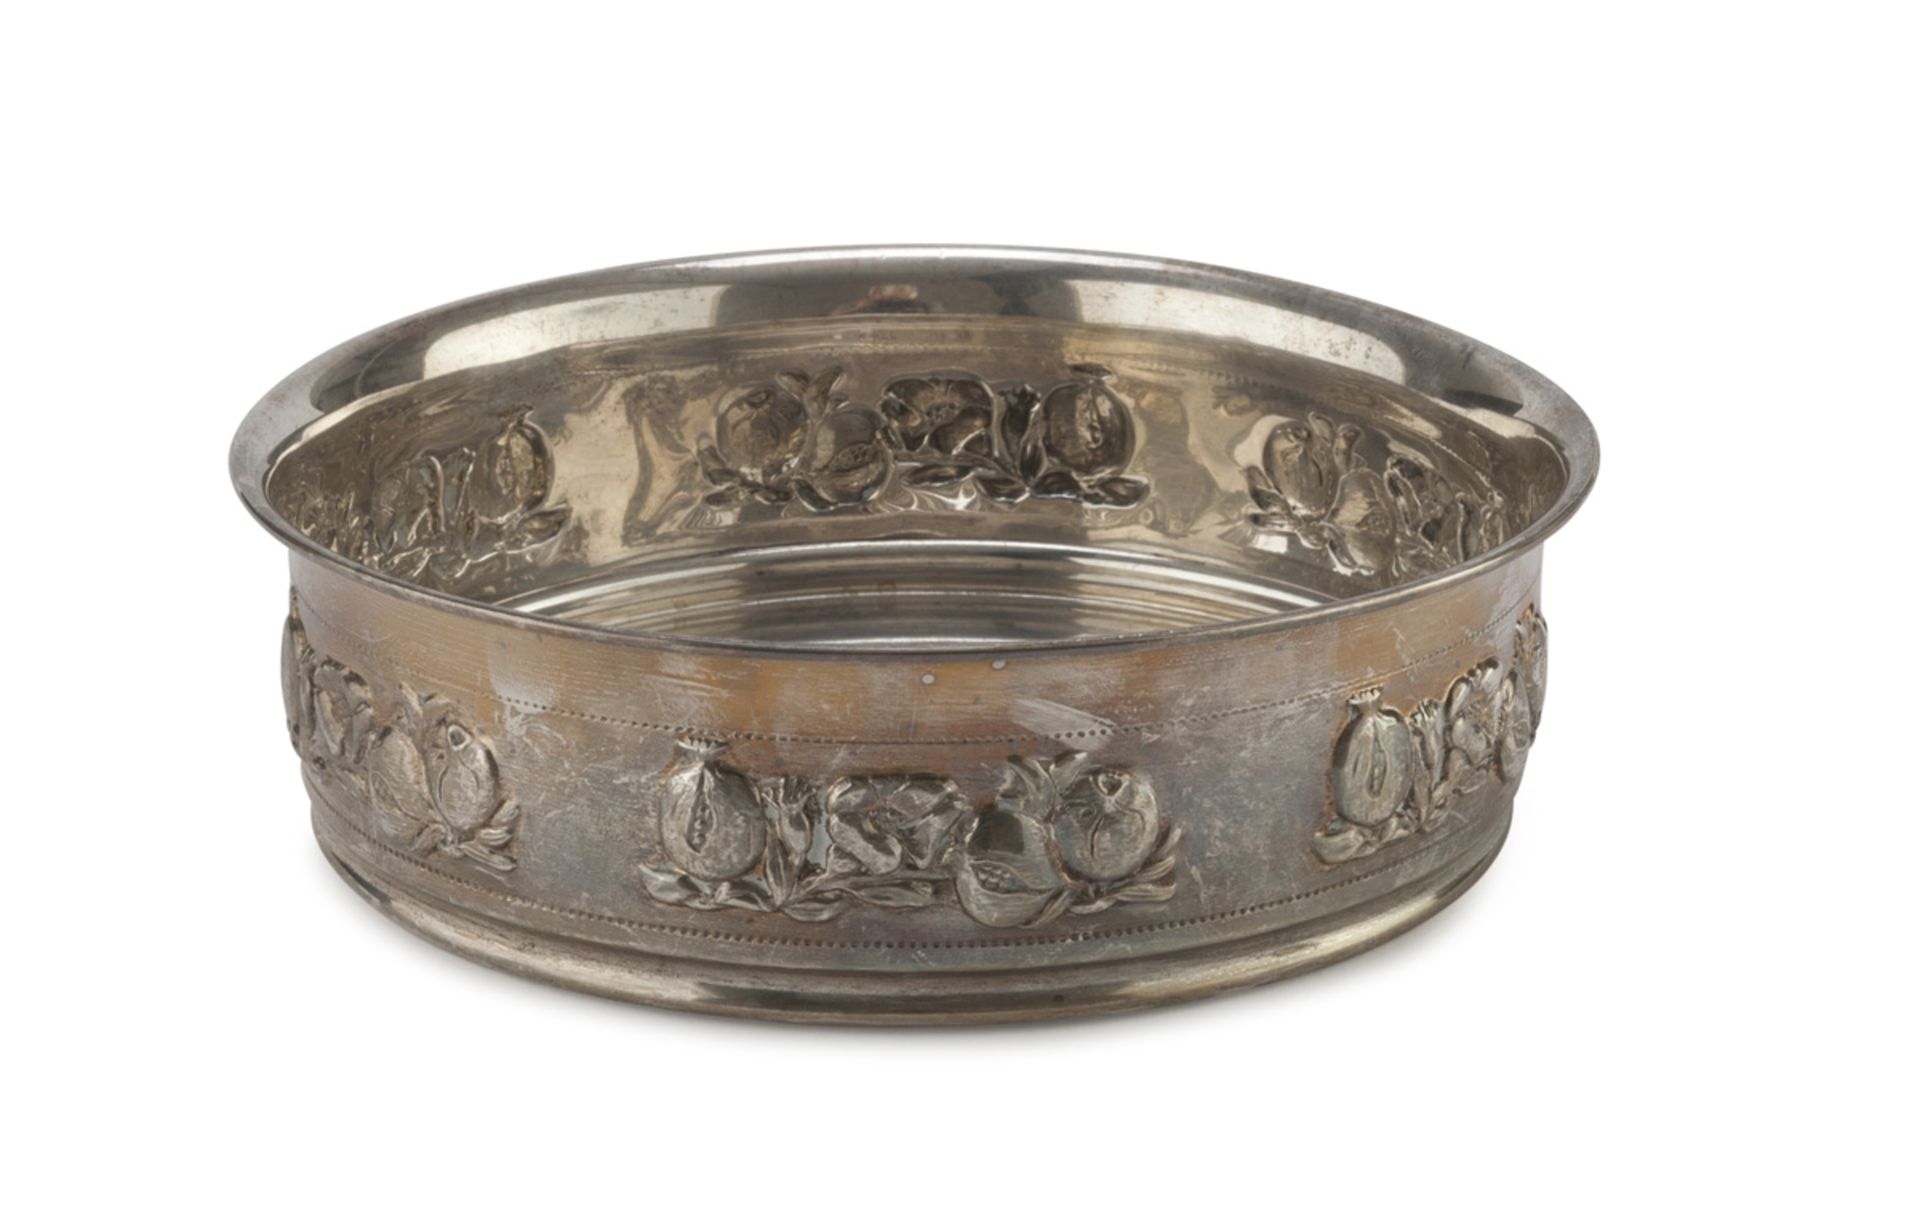 SILVER-PLATED BOWL 20TH CENTURY